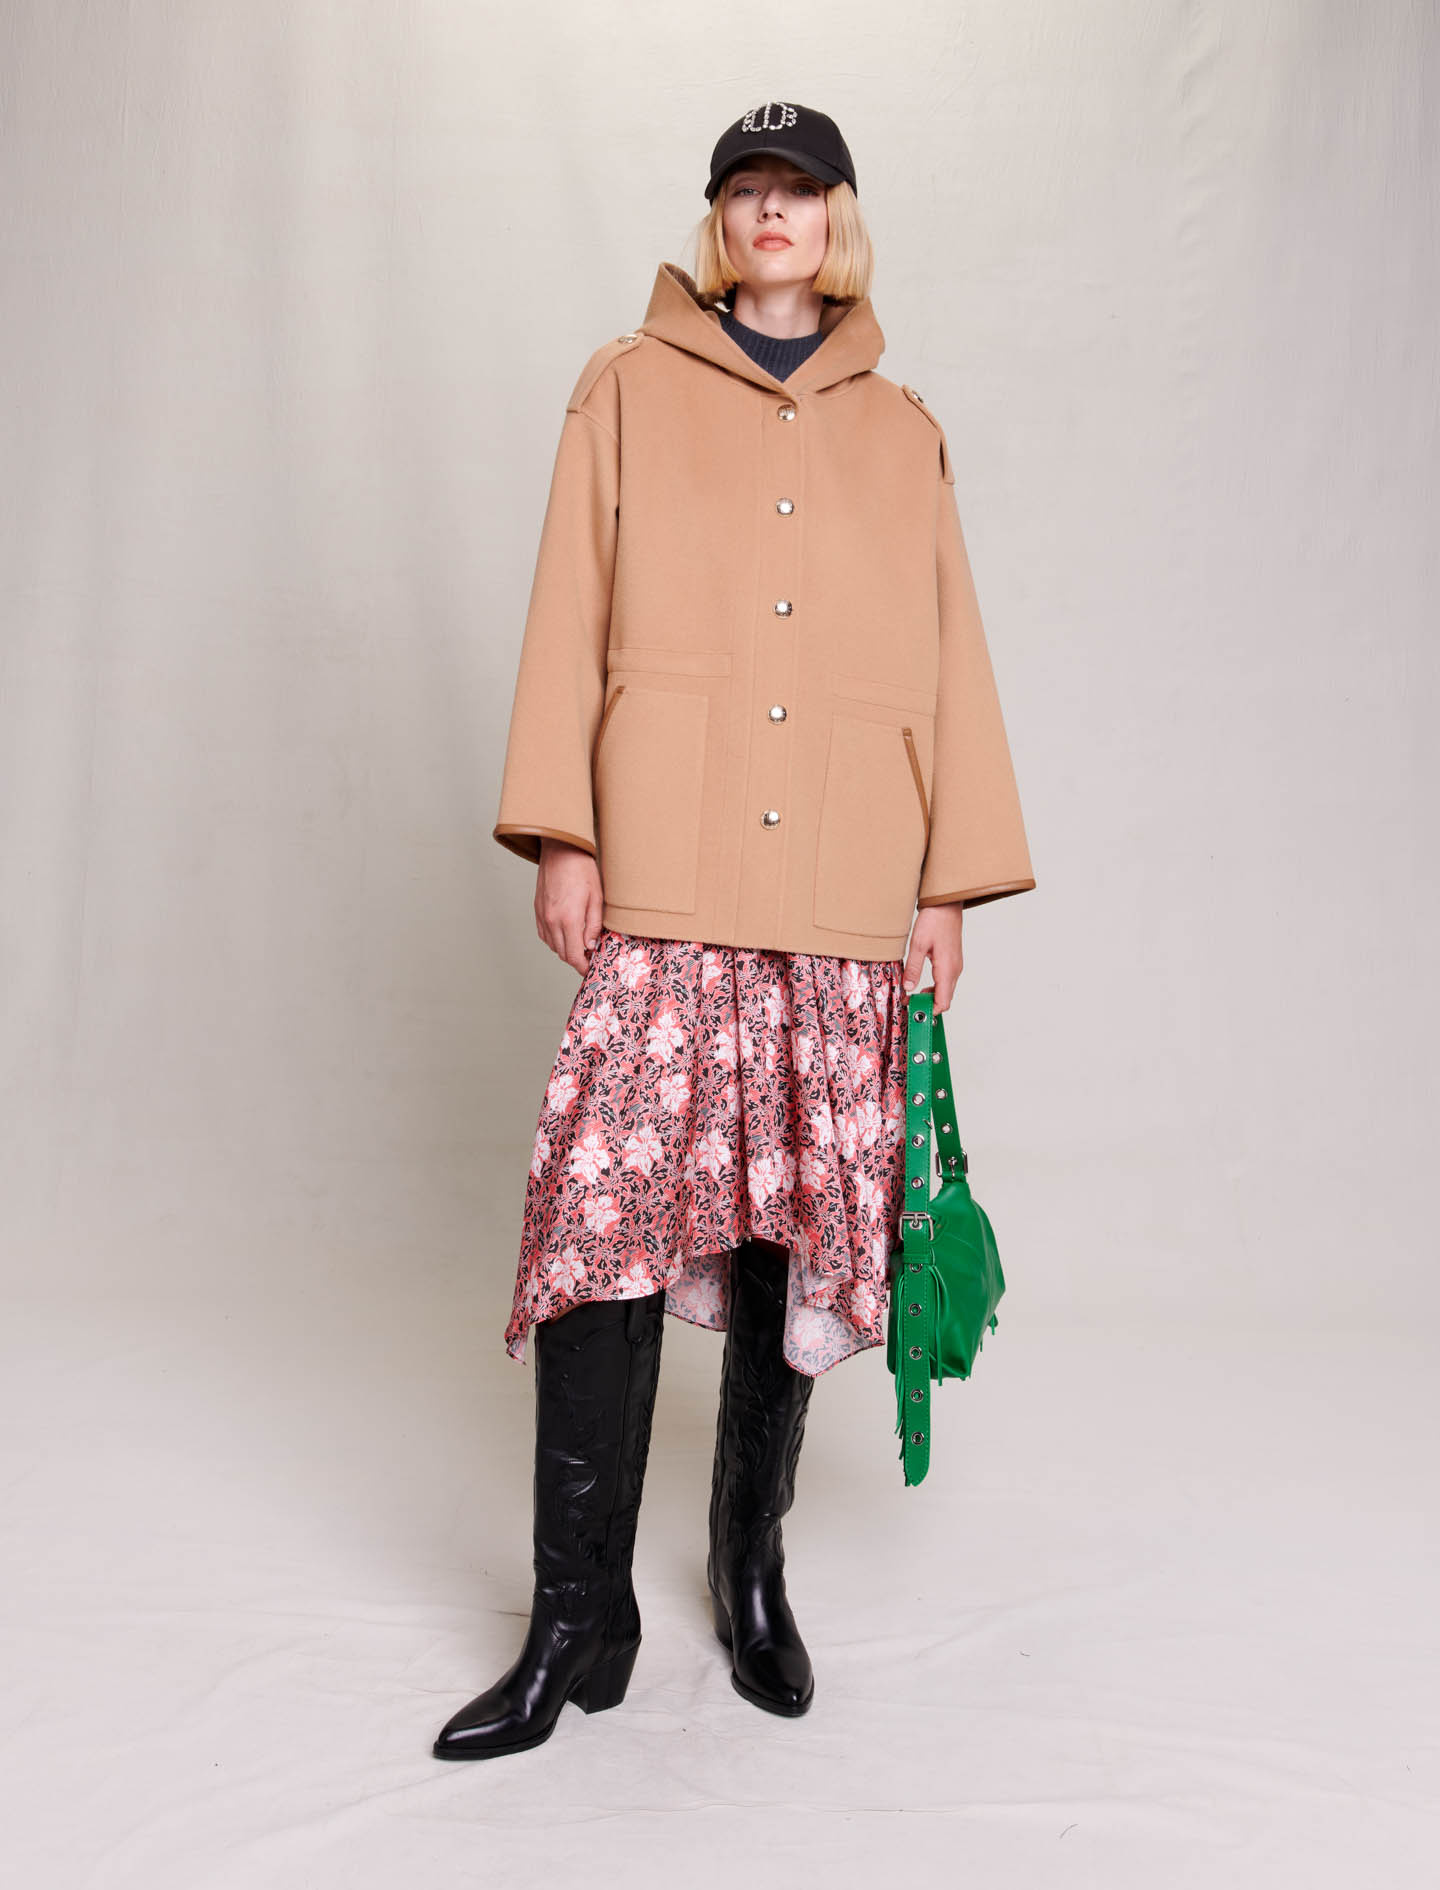 Maje Woman's wool, Hooded coat for Fall/Winter, in color Camel / Brown